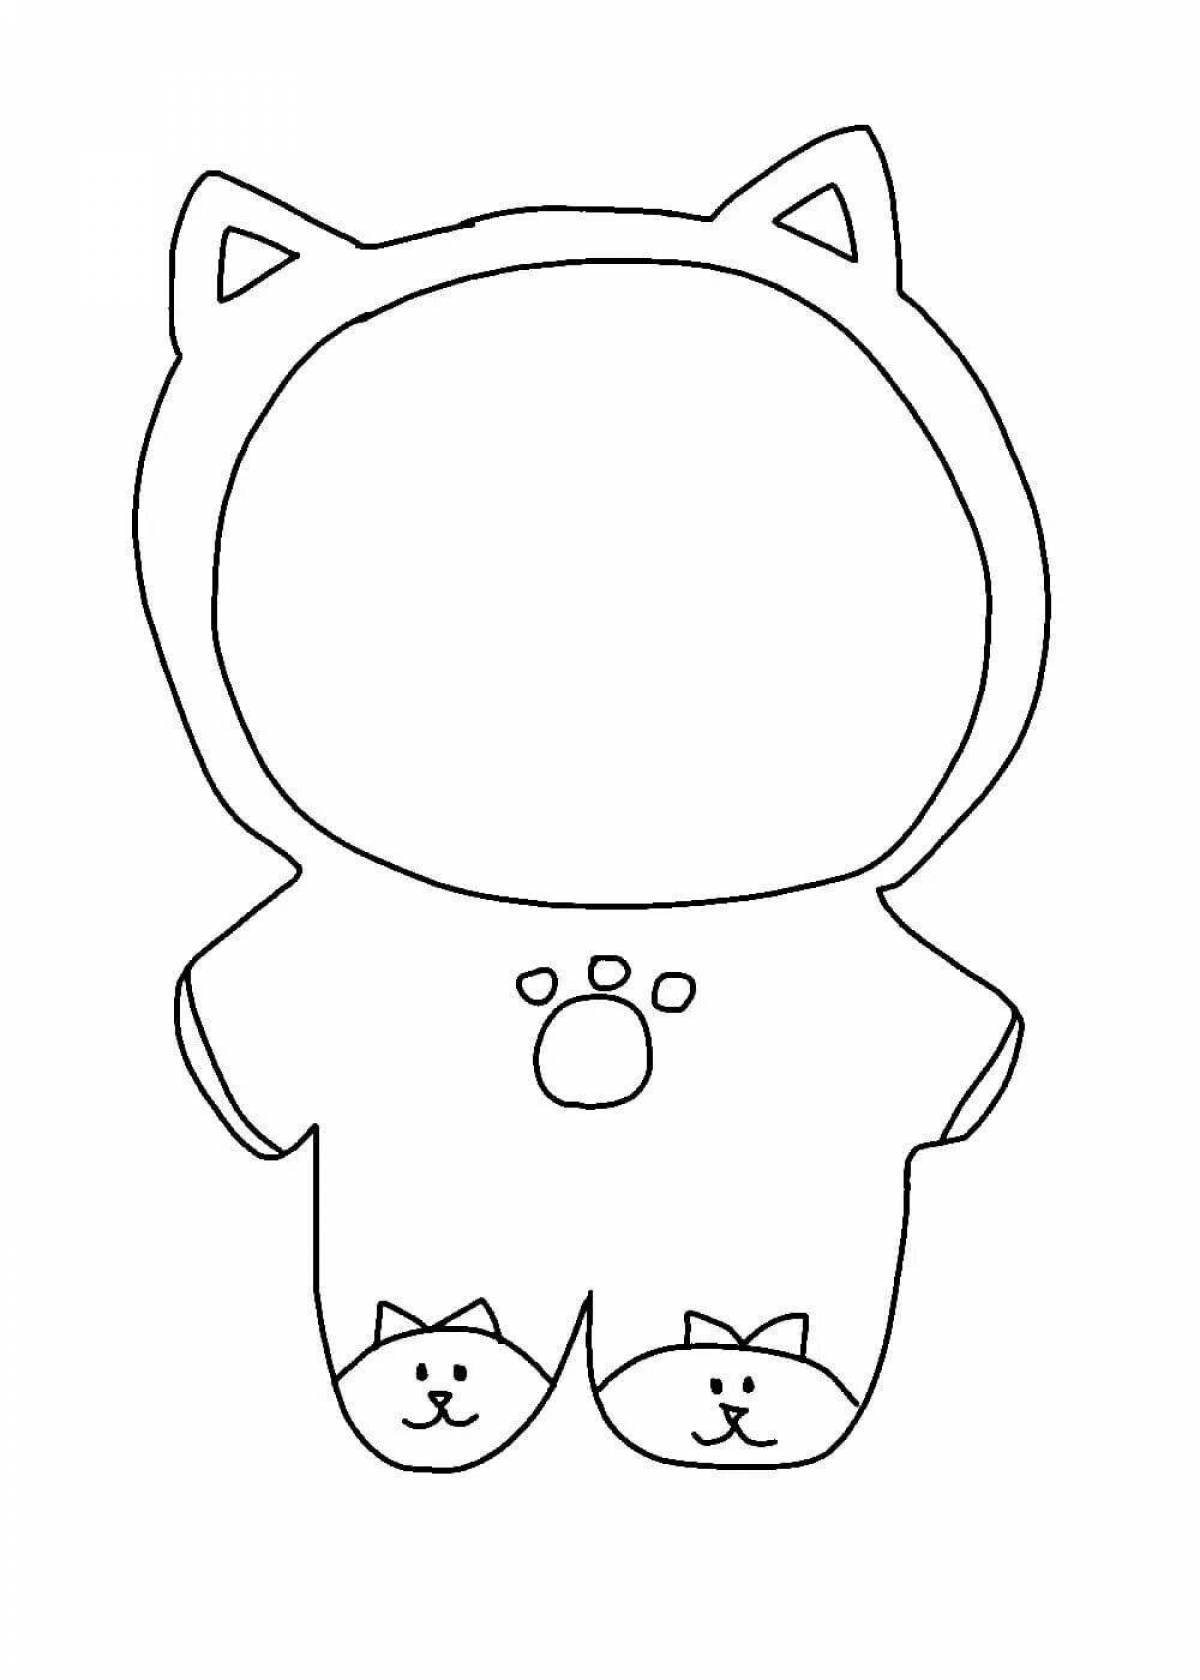 Alan fanfan's animated coloring page